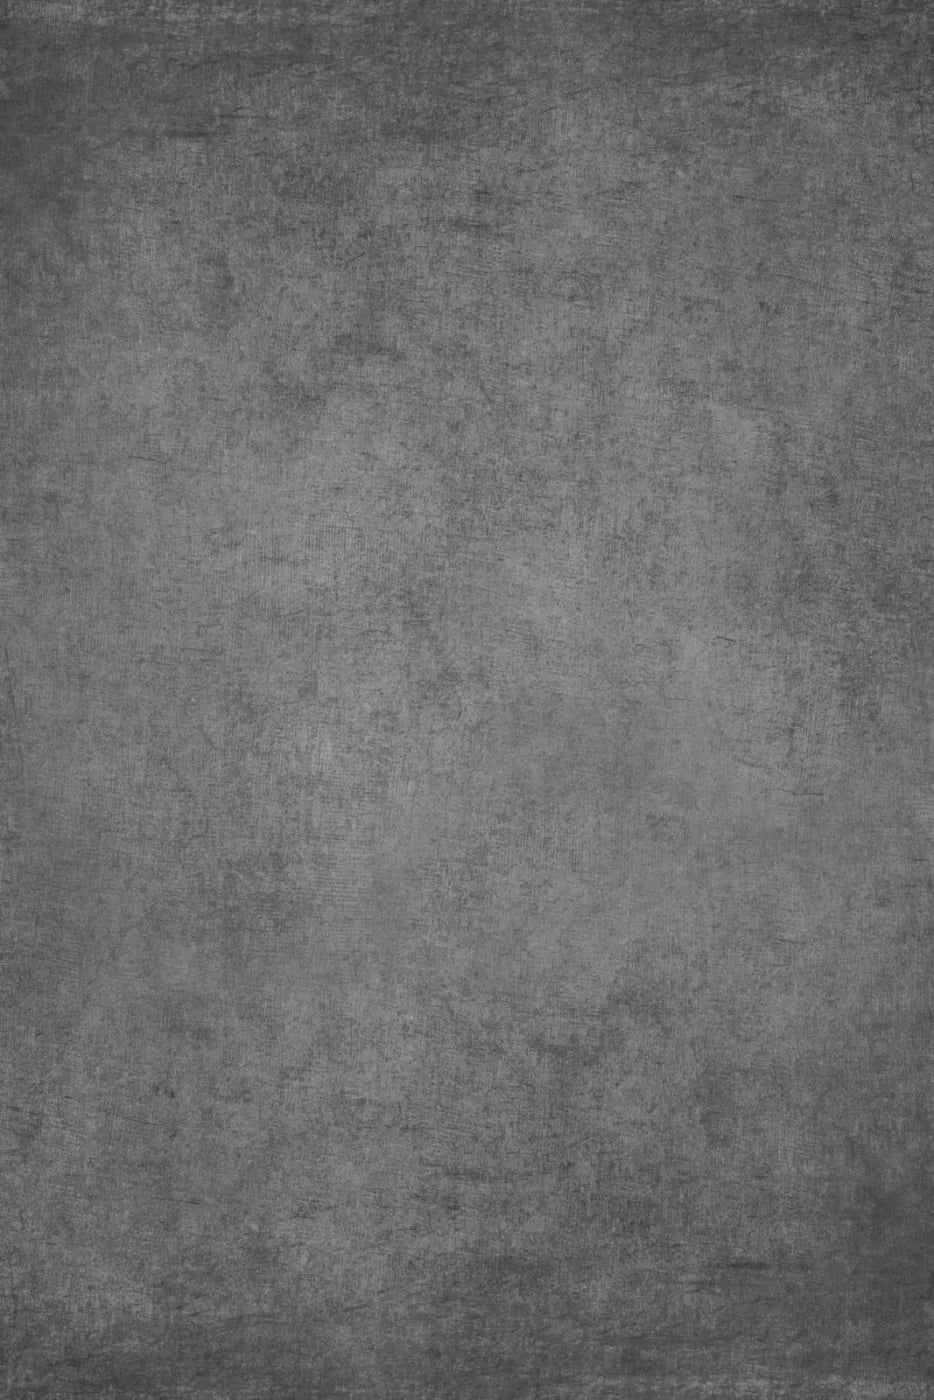 Classic Texture Dark Cool Gray 5X76 For Lvl Up Backdrop System ( 60 X 90 Inch )